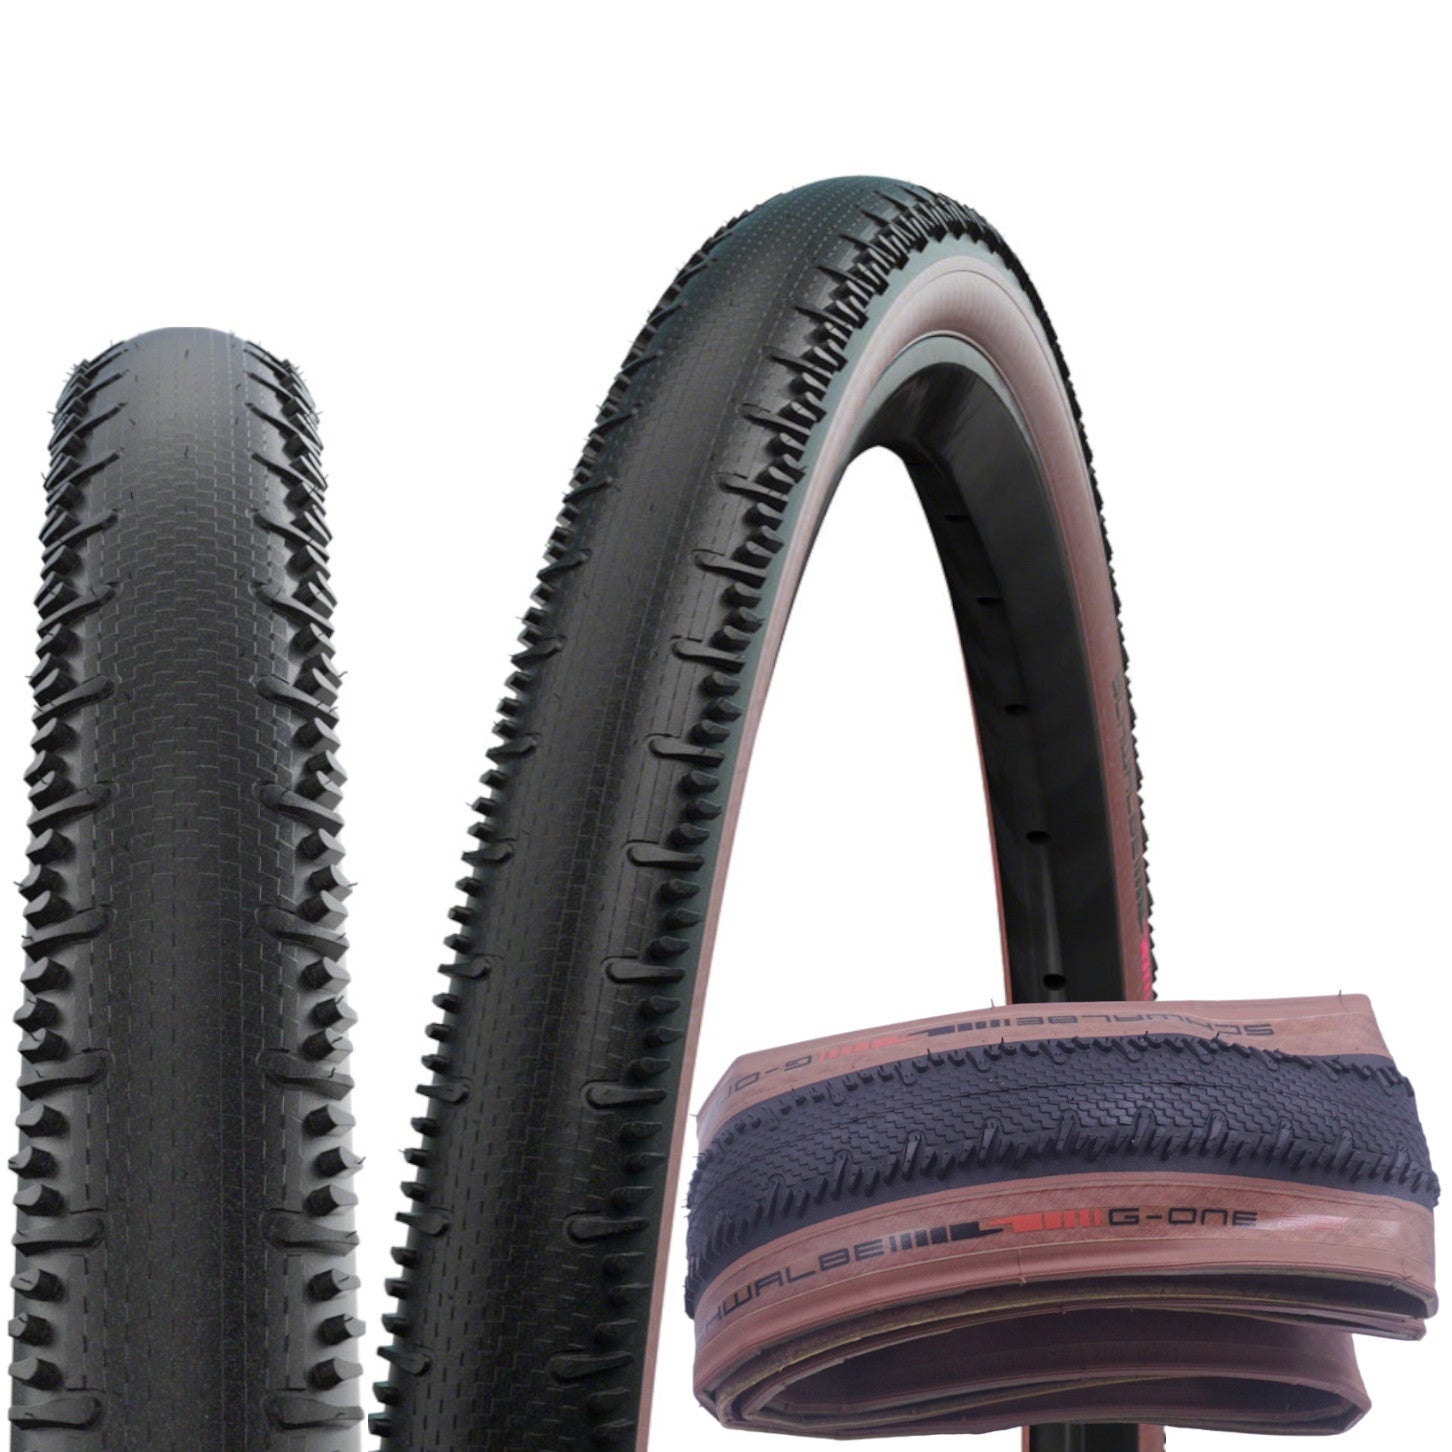 Schwalbe G-One RS 700c Brownwall Tubeless S-Race Folding Gravel Tire